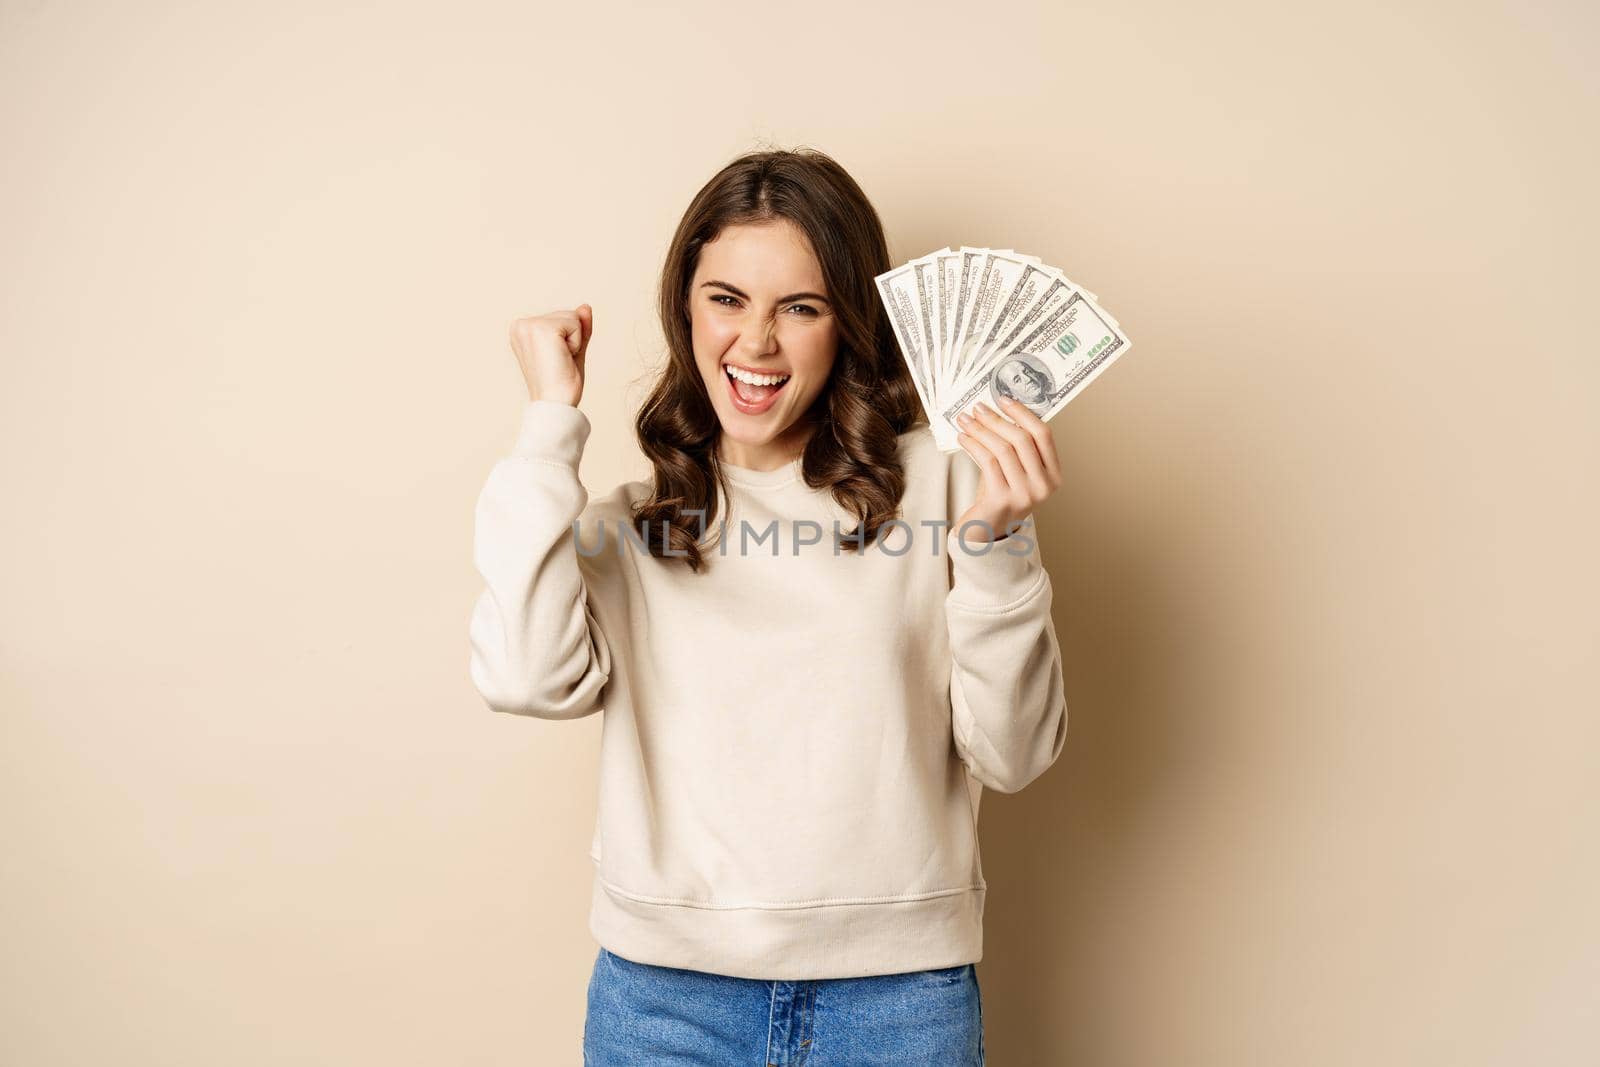 Enthusiastic modern woman winning money, got cash, celebrating and shouting of joy, standing against beige background.